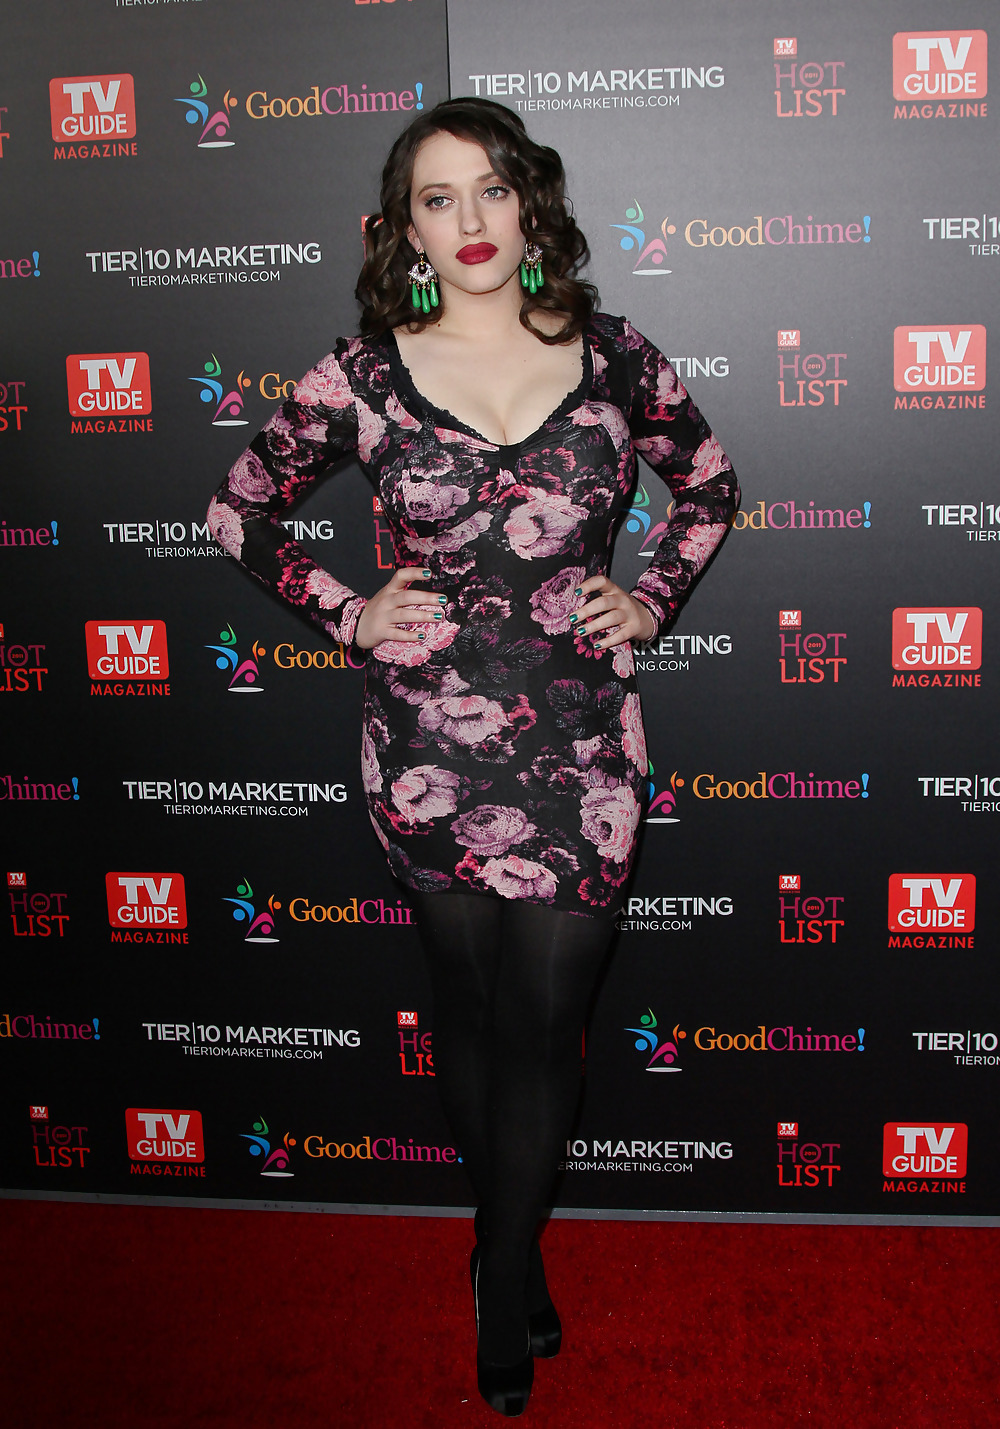 Kat dennings - tv guide magazines hot list party in la
 #6758005